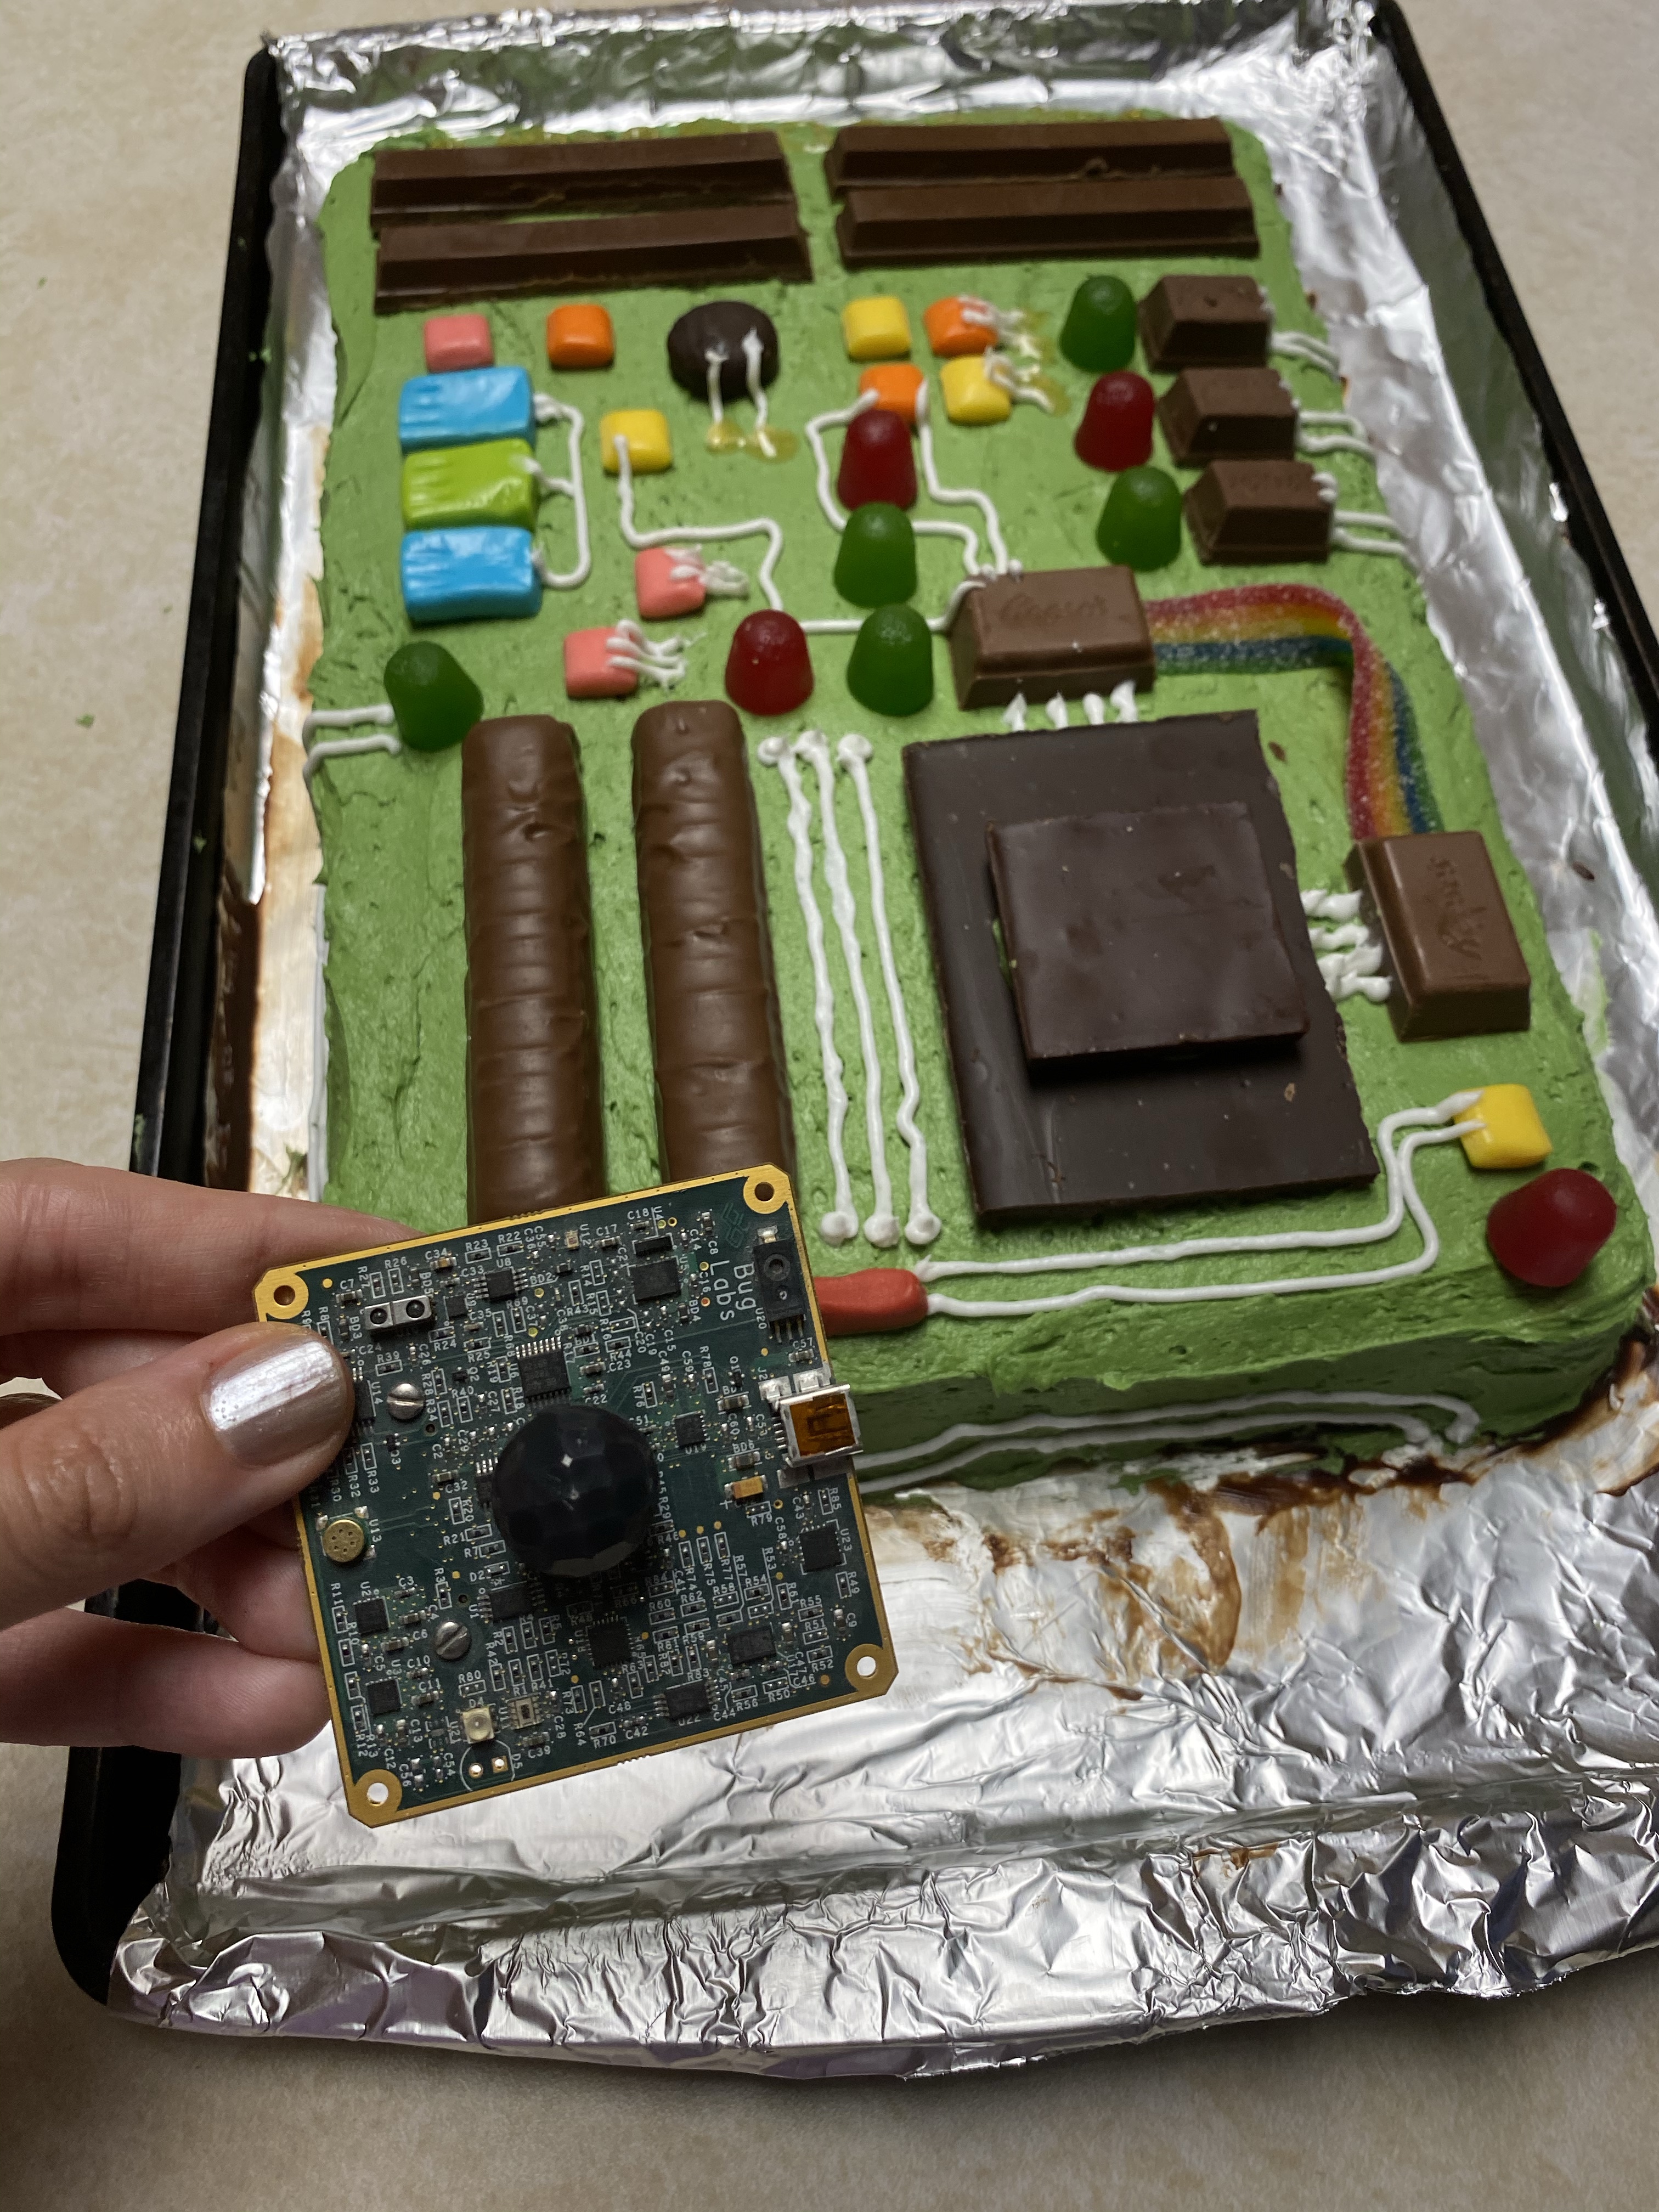 "Fatherboard Cake", a cake decorated with candies to look like a circuit board @ bestwithchocolate.com